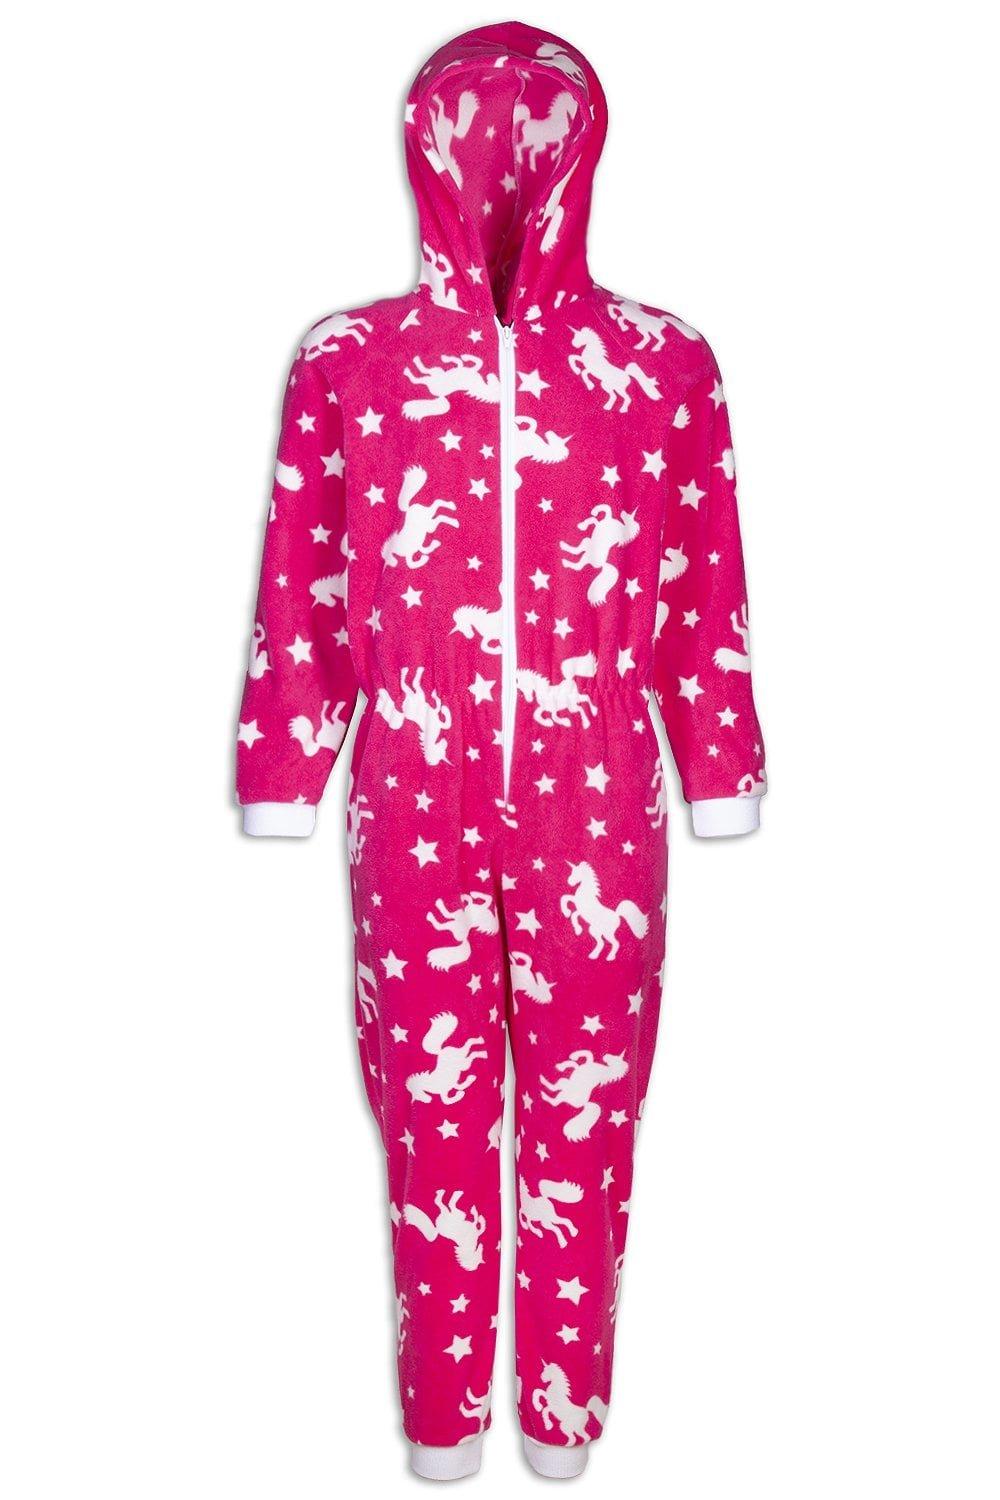 Supersoft Unicorn Print All In One Hooded Onesie